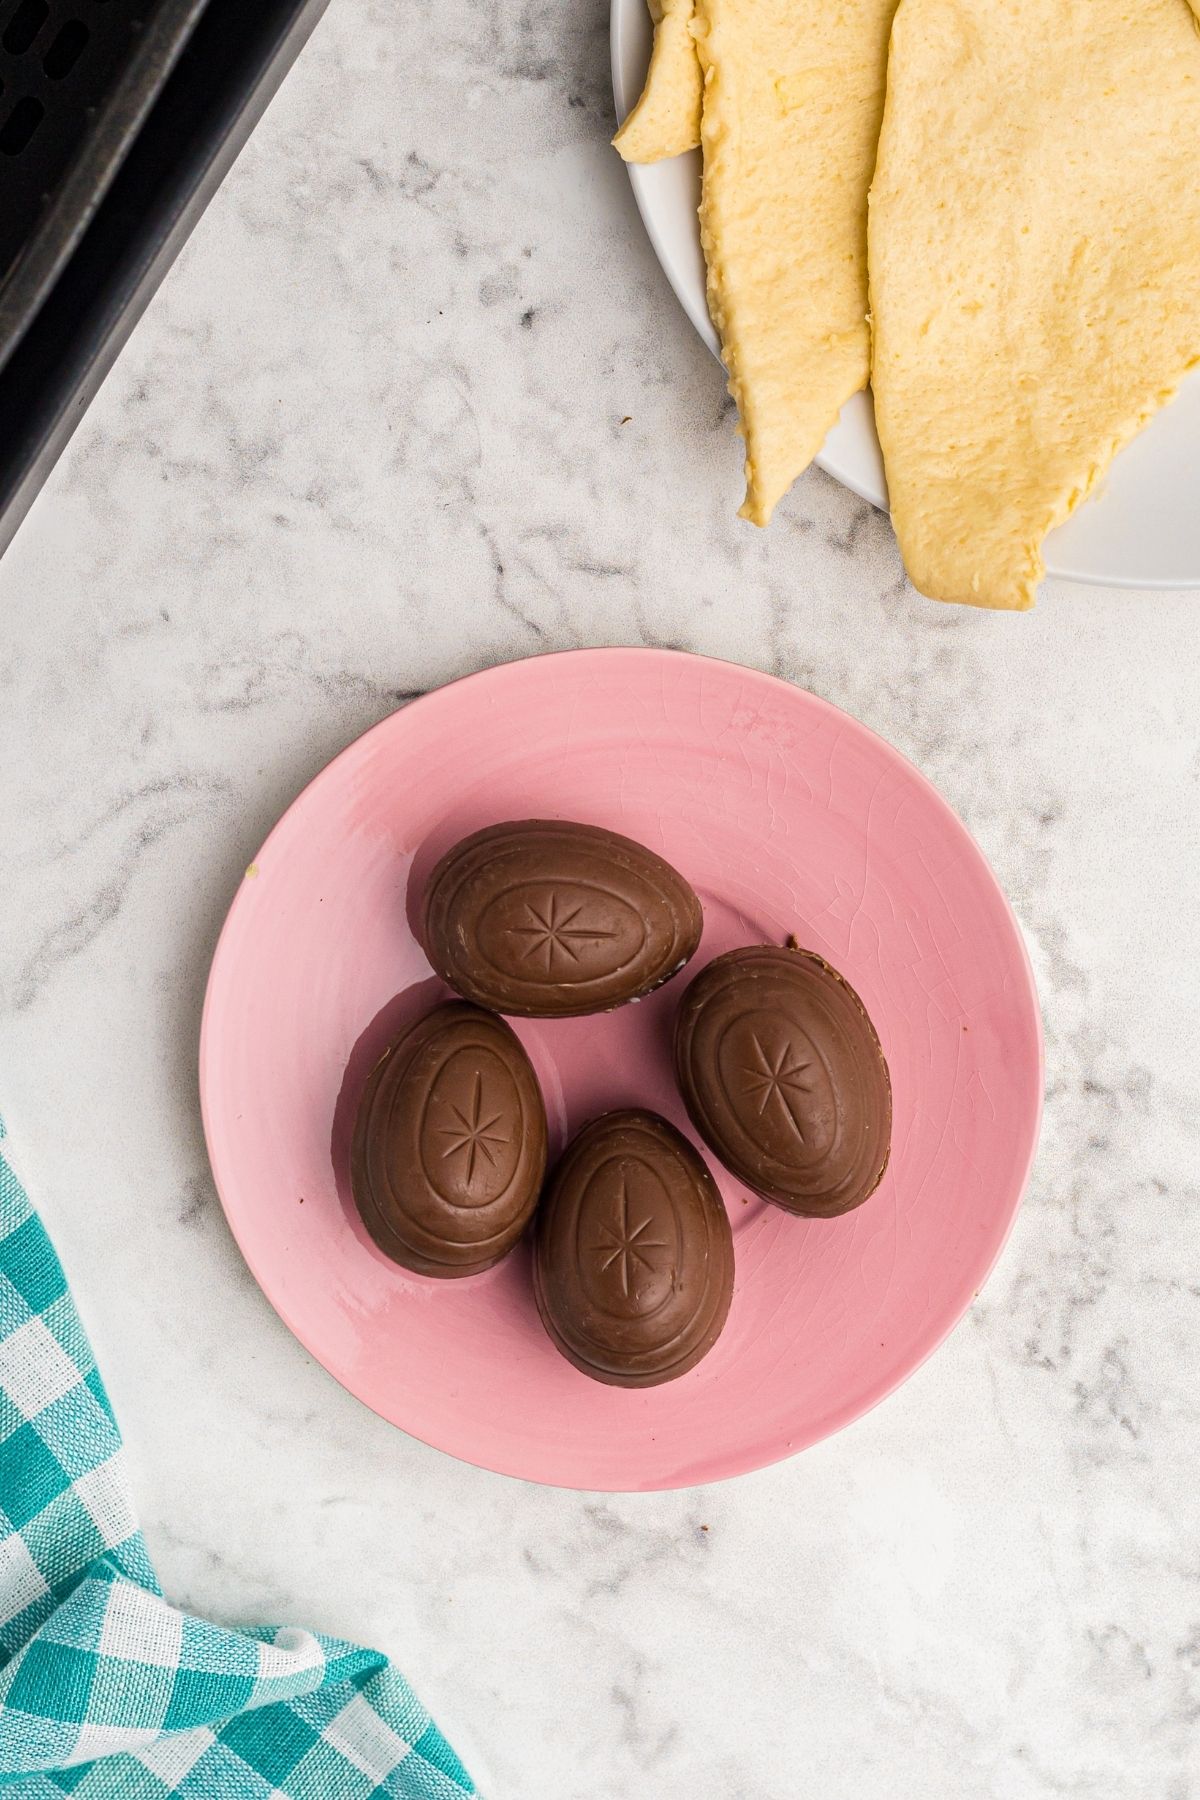 Unwrapped chocolate eggs and lay out crescent rolls